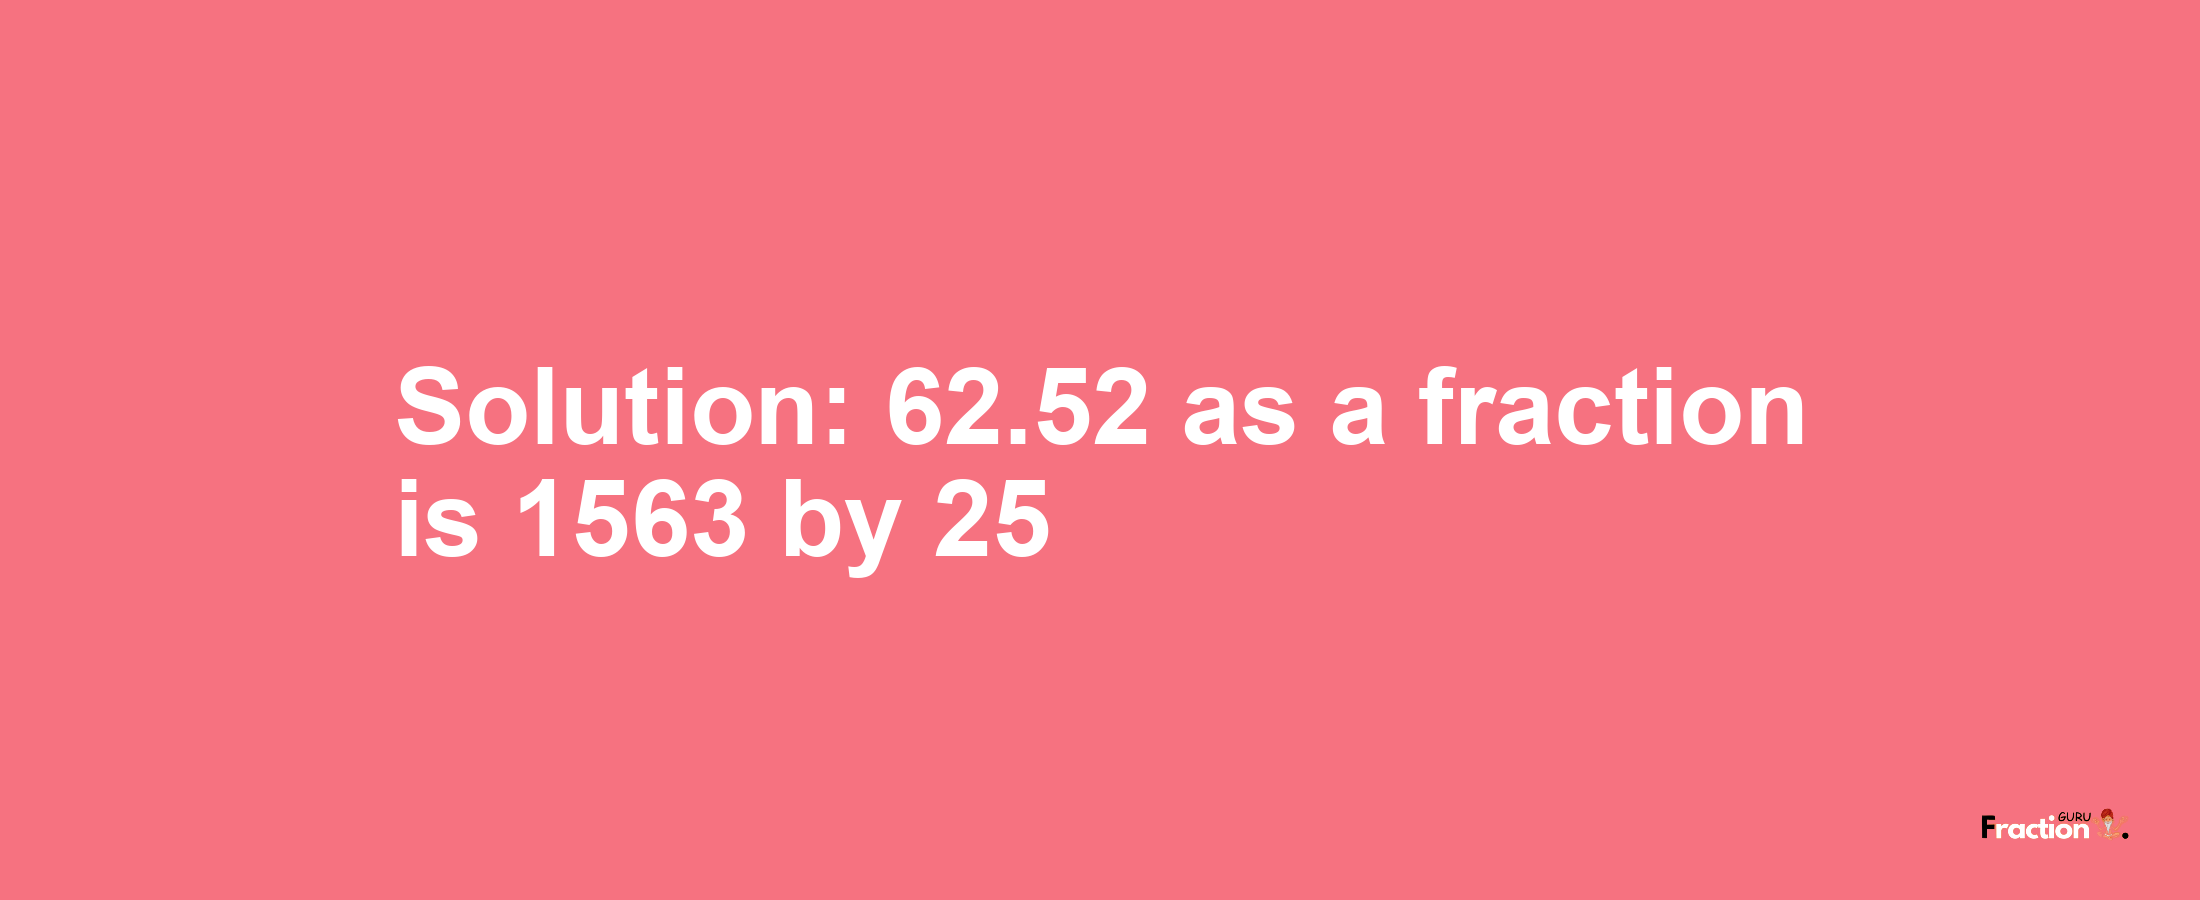 Solution:62.52 as a fraction is 1563/25